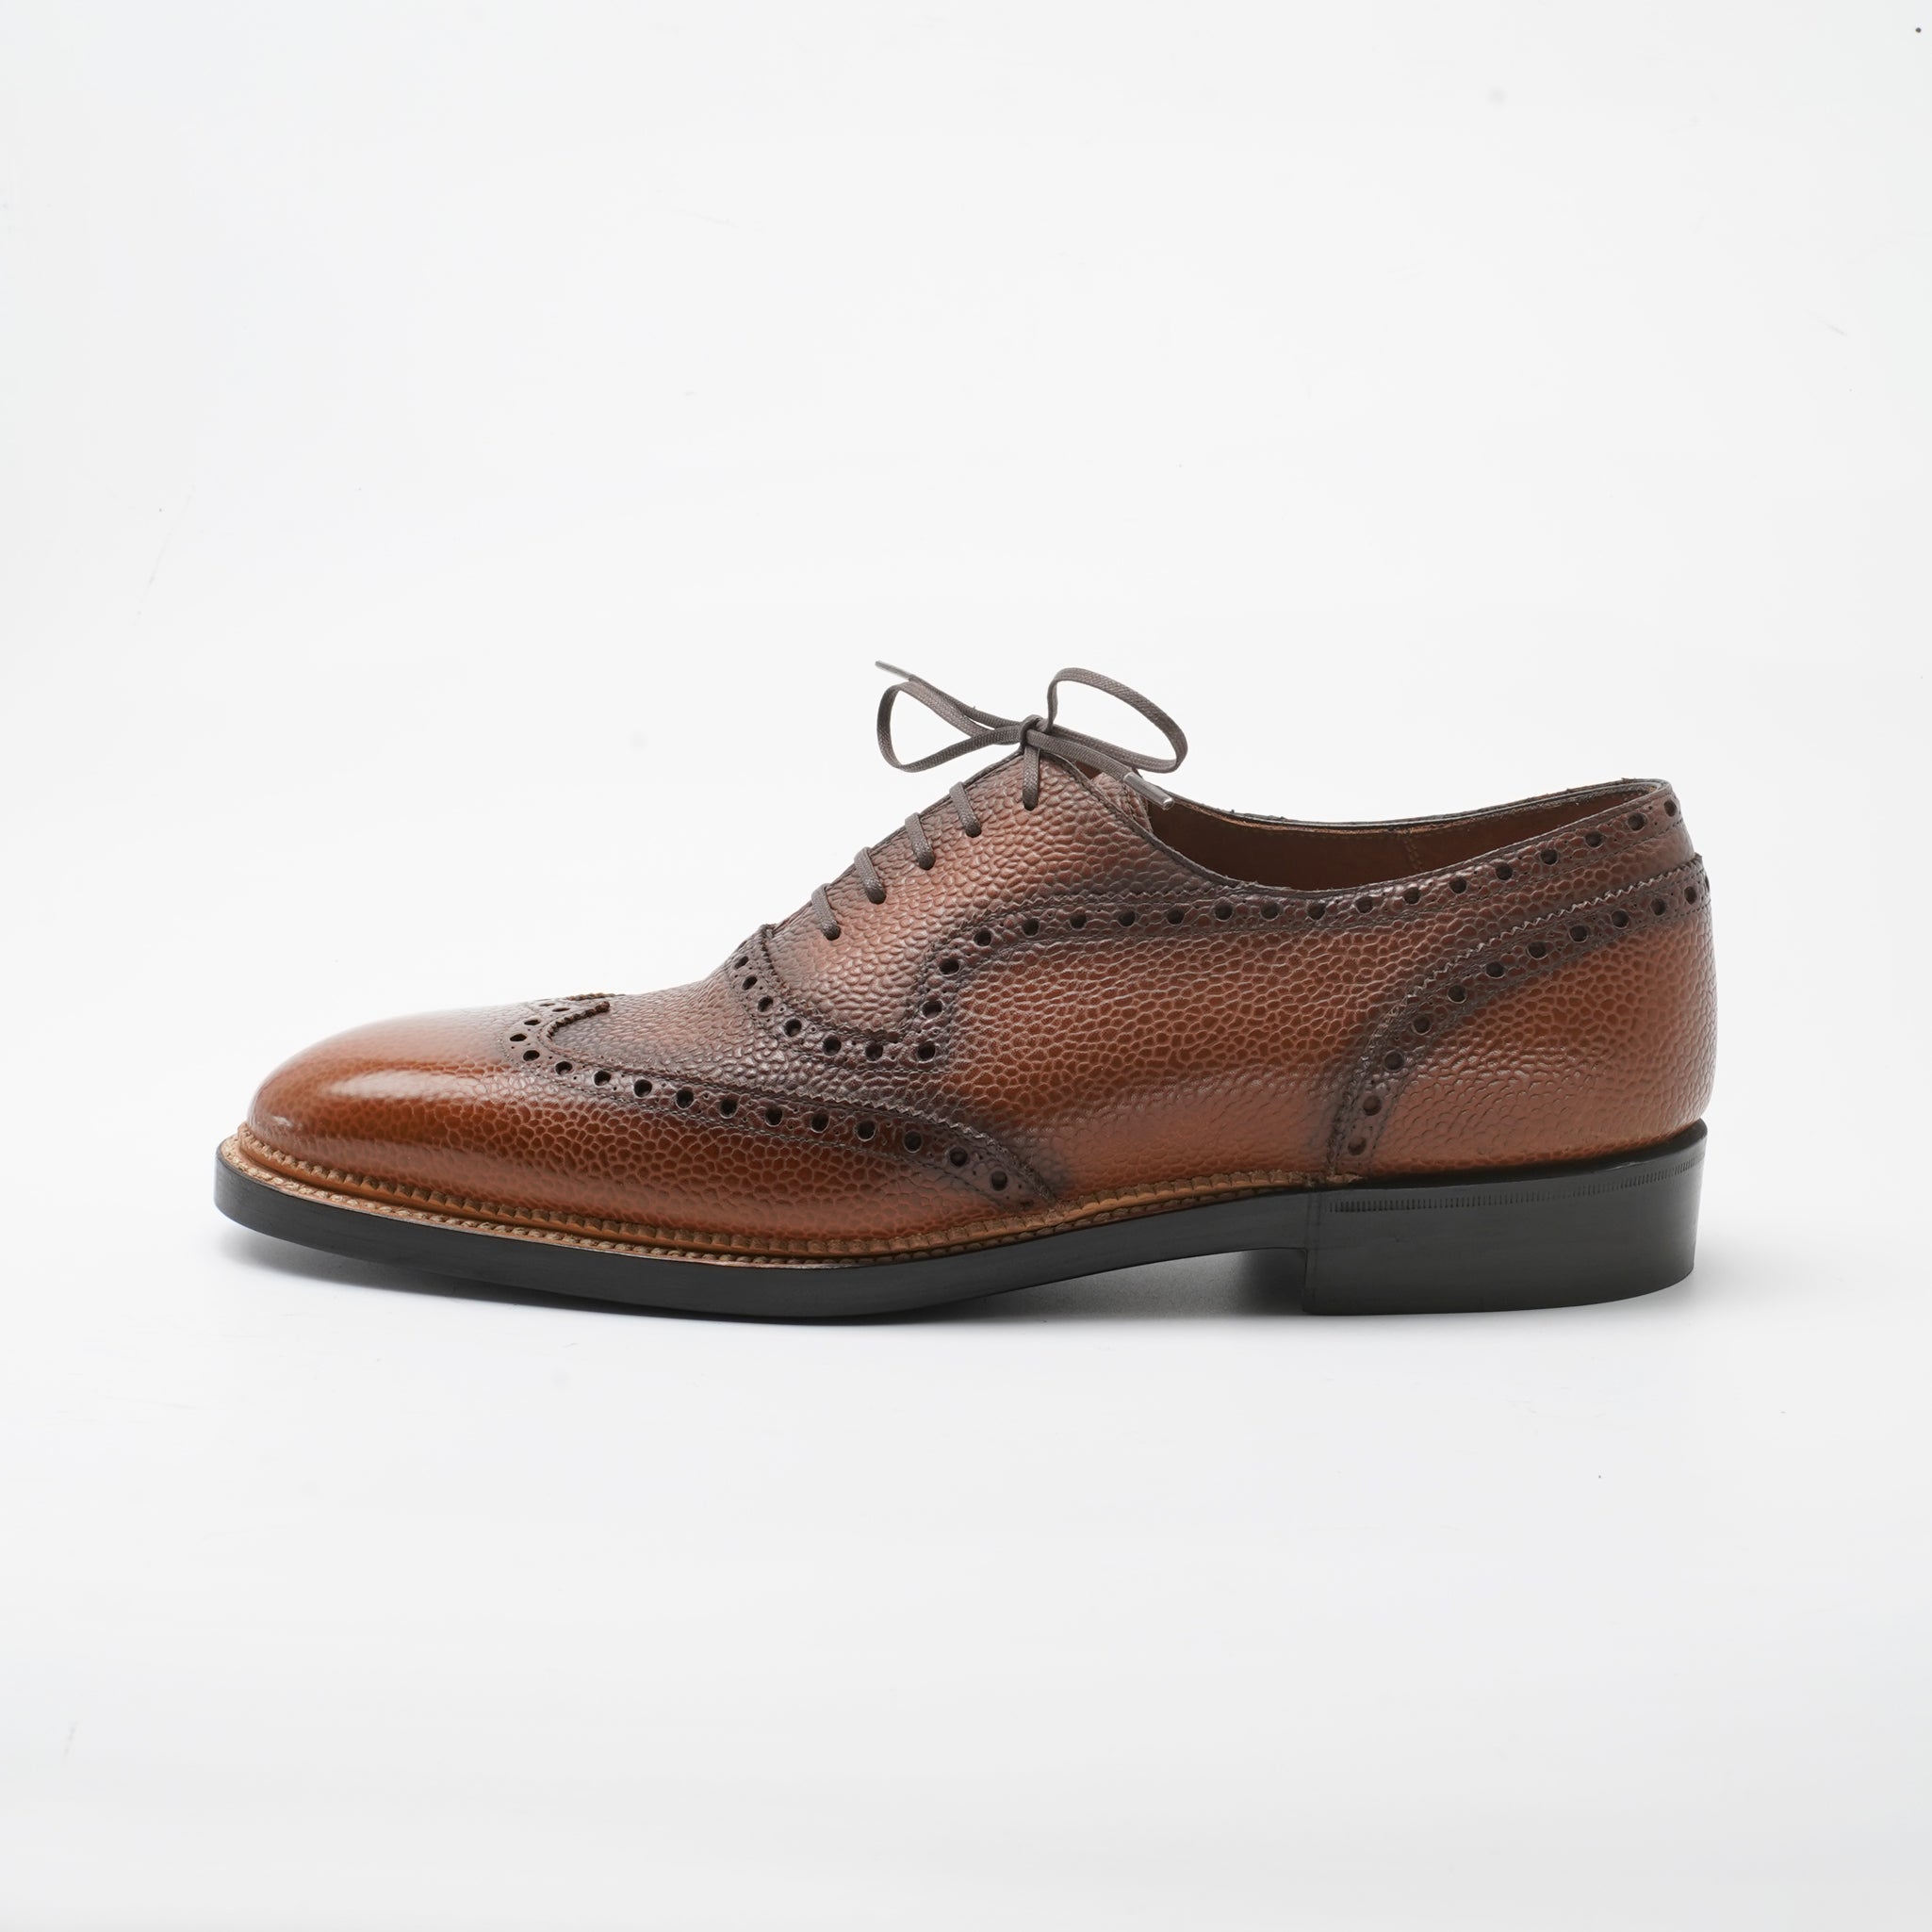 Mariano Wingtip Adelaide Oxford by Norman Vilalta men’s oxford shoes in Barcelona, Spain.